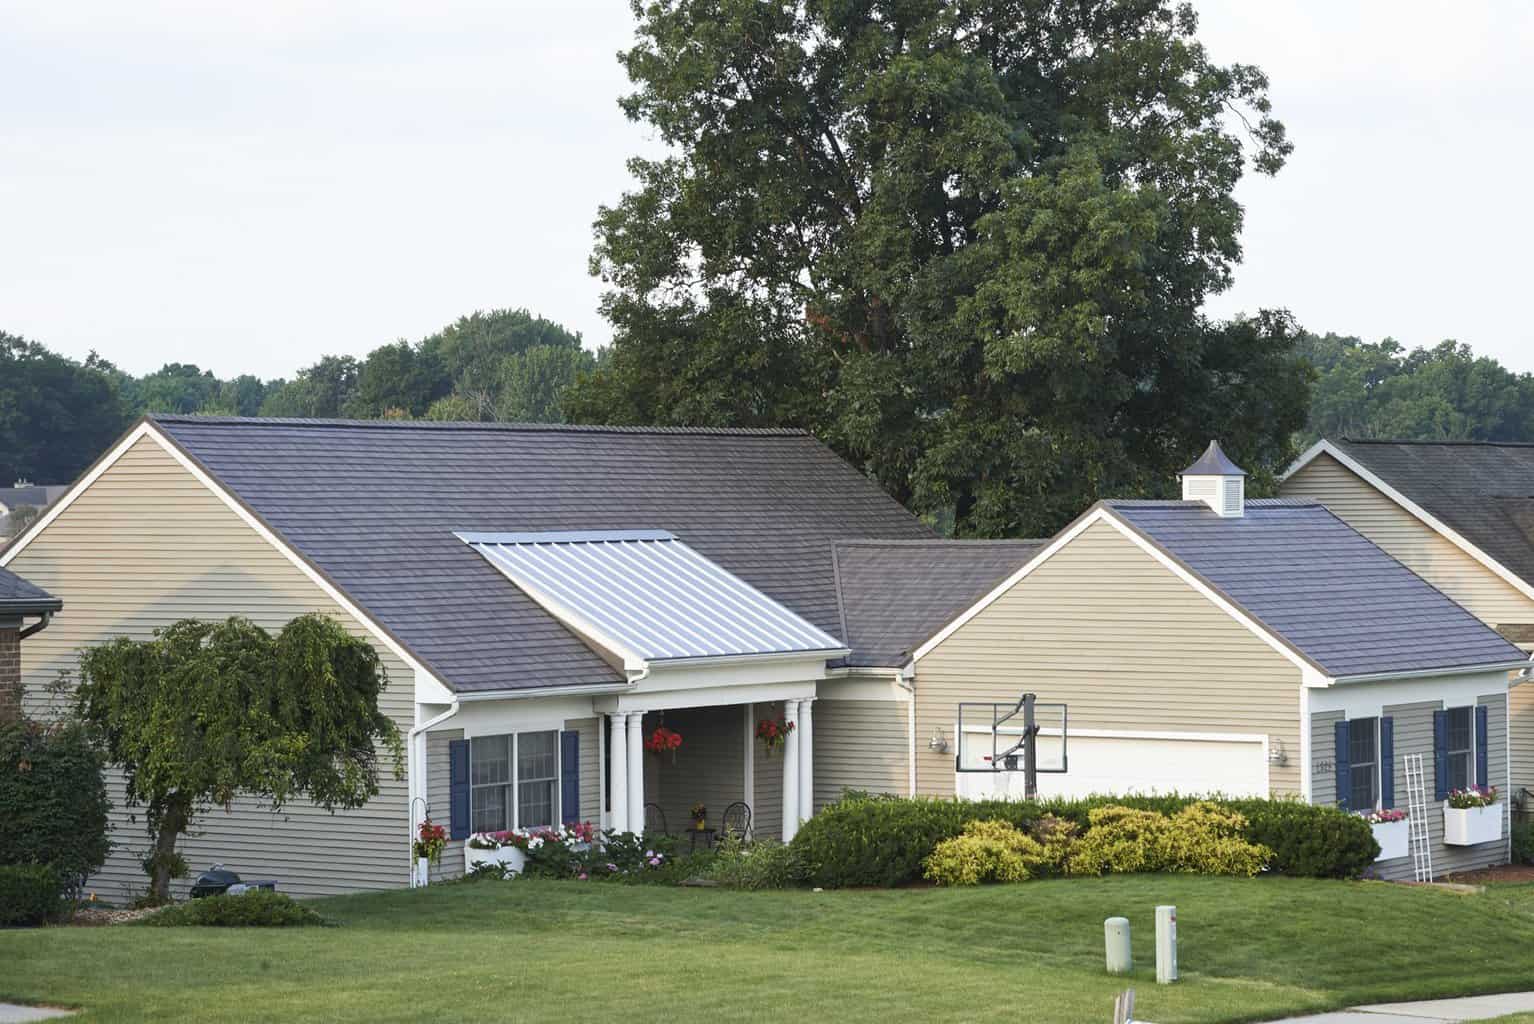 Image shows the exterior of a home with grey shingled roof